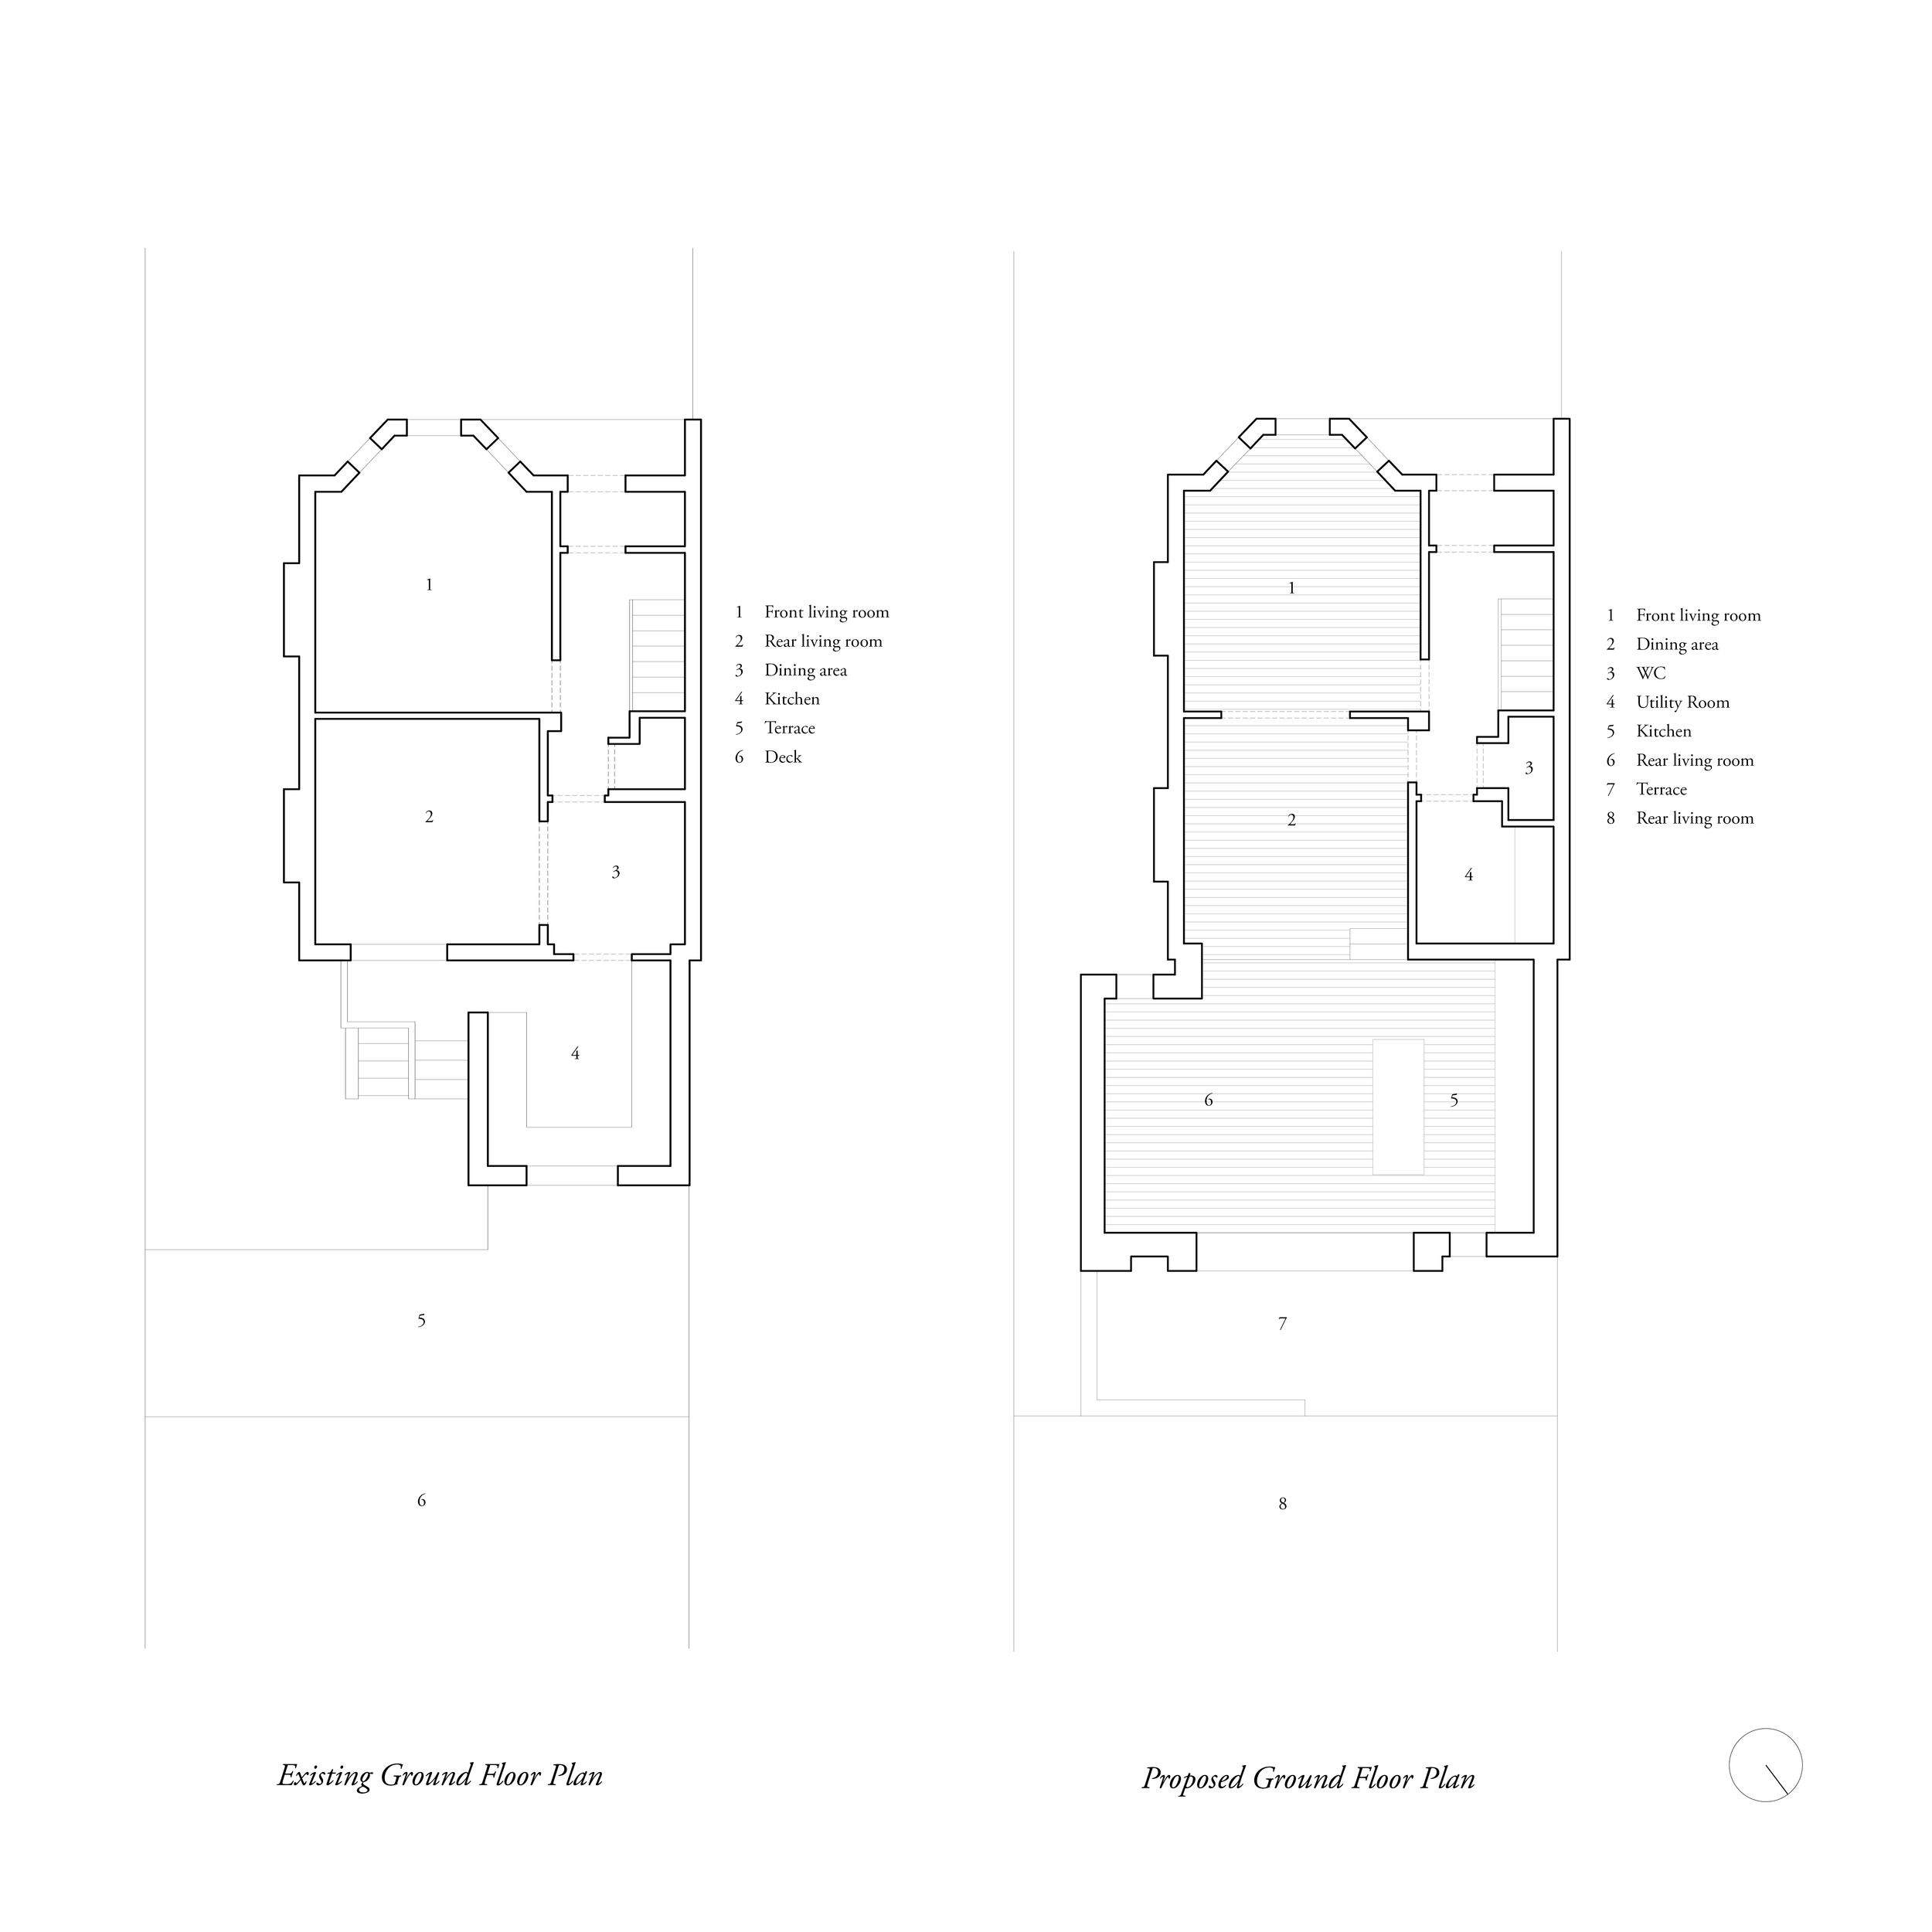 caithness architects_extension east belfast_existing and proposed plans.png